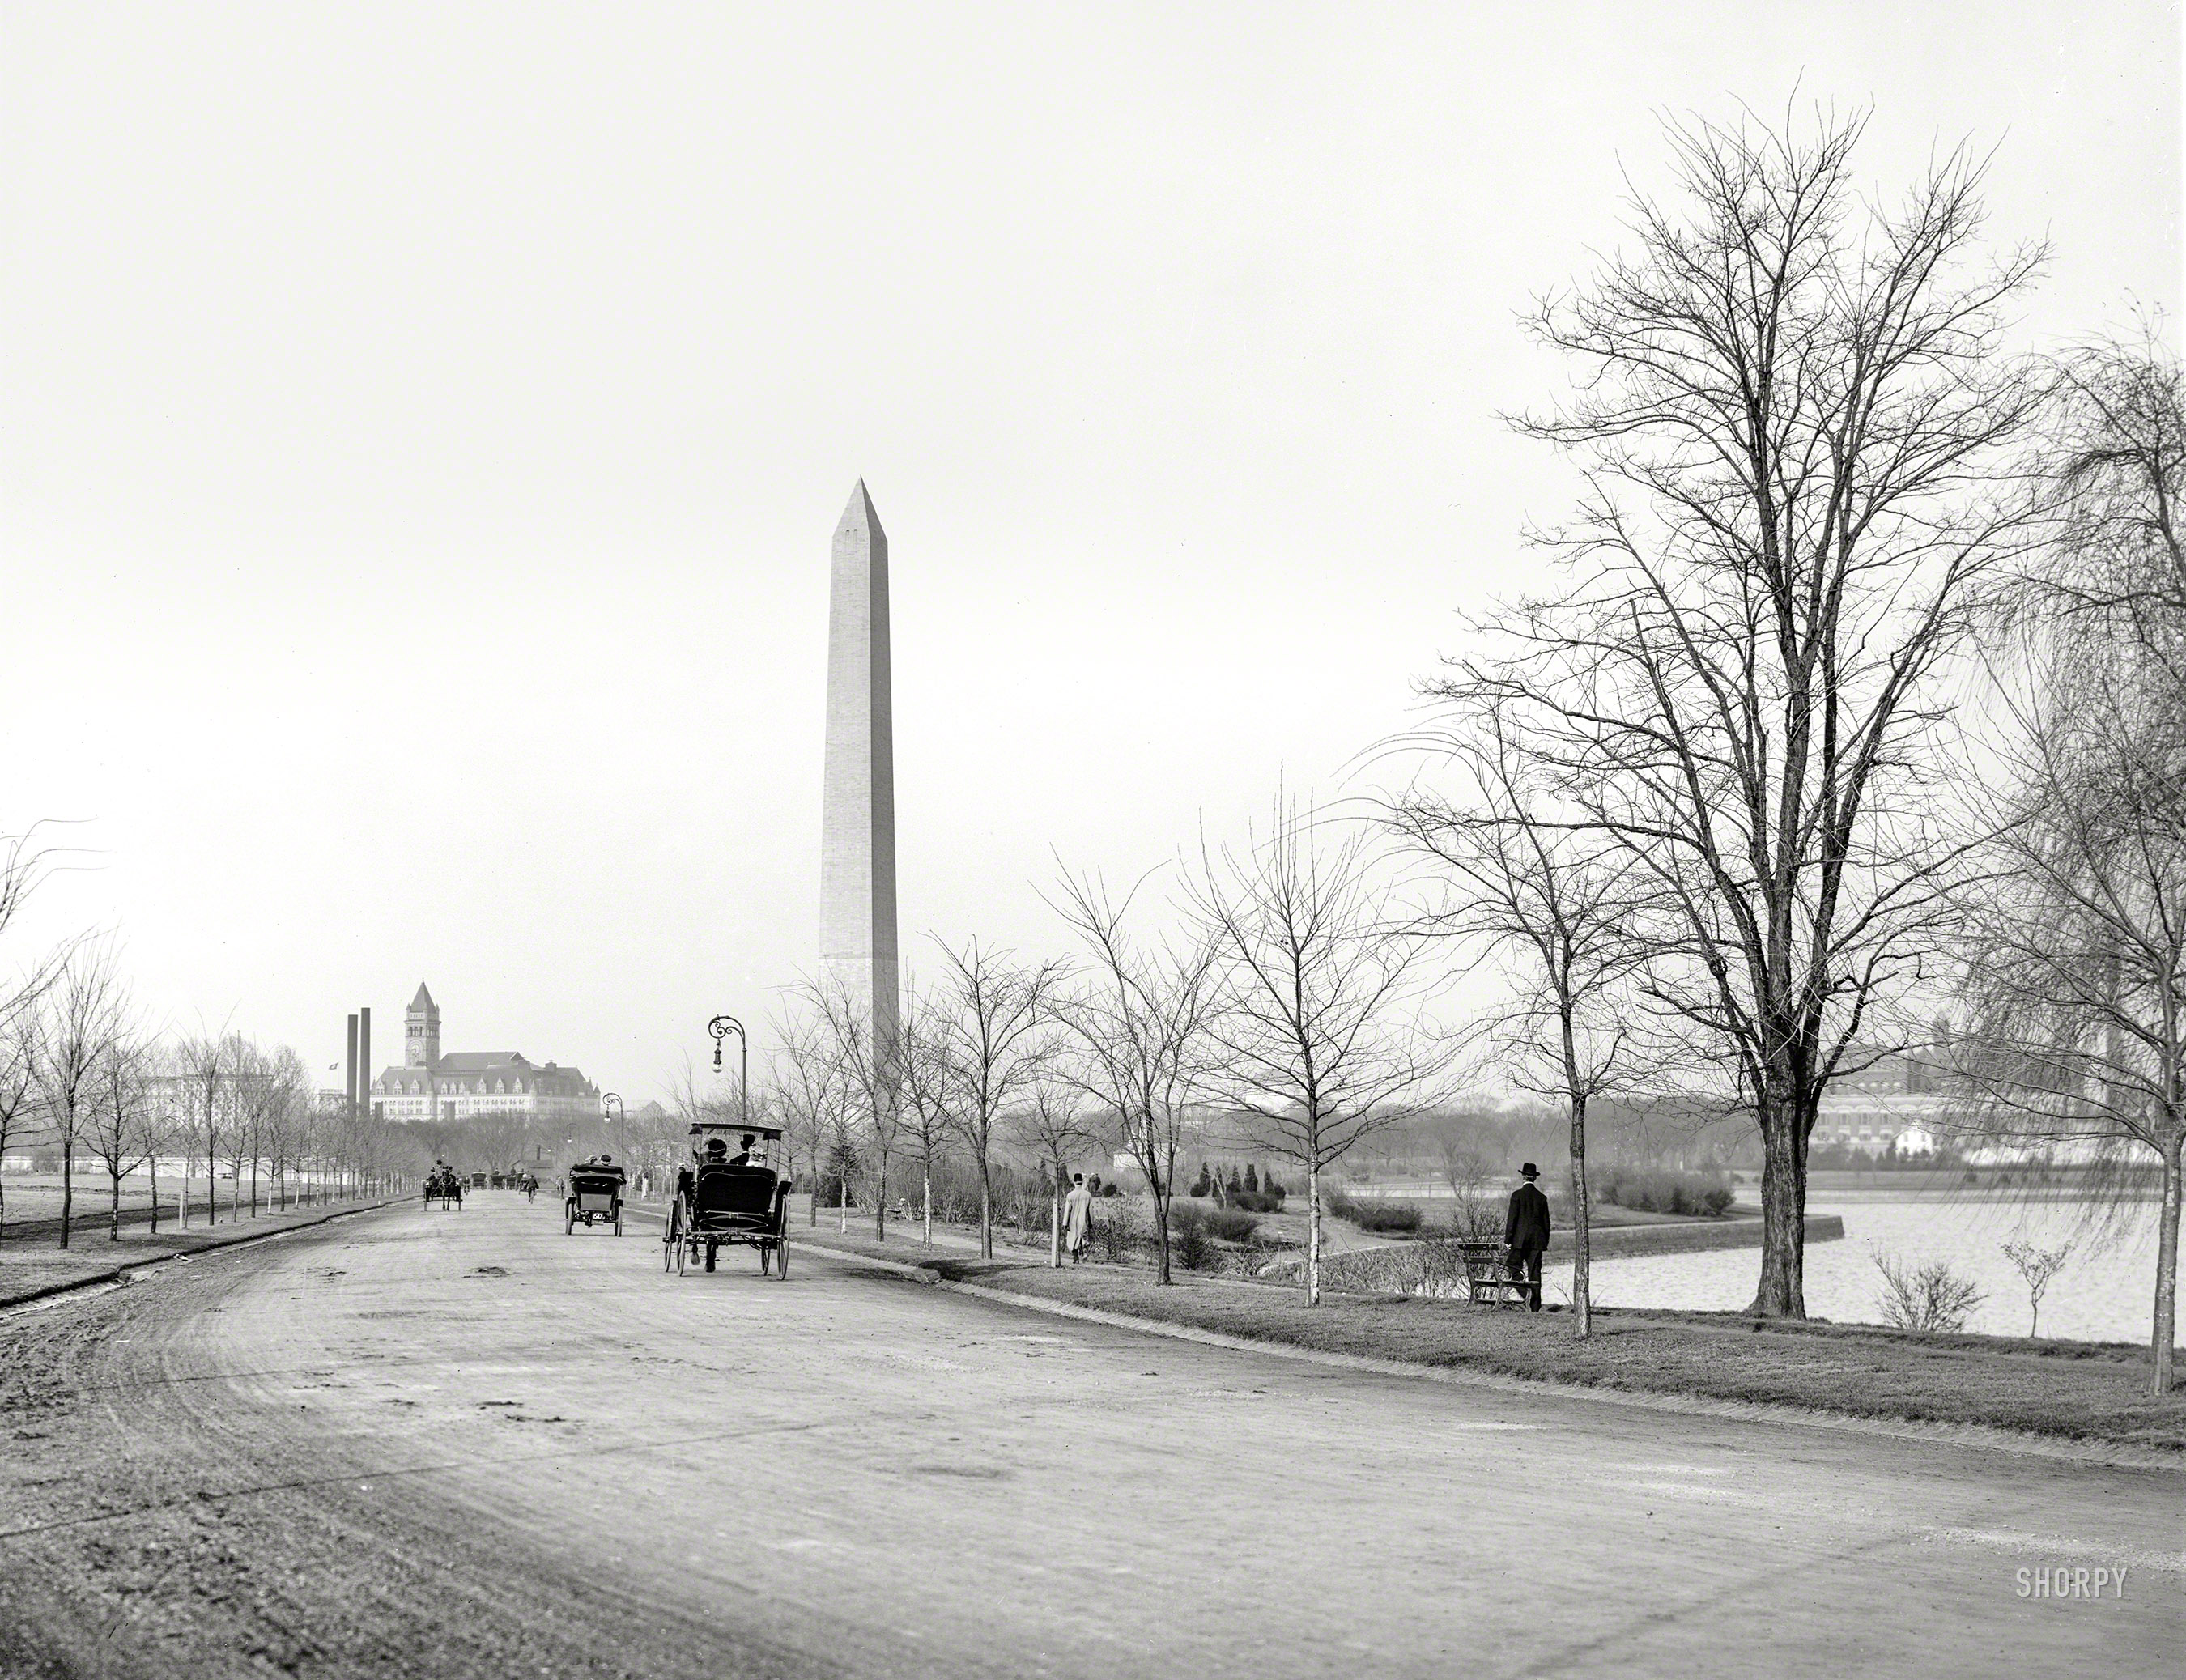 Washington, D.C., circa 1908. "The Boulevard, Potomac Park." The Washington Monument flanked by the Tidal Basin and Old Post Office. View full size.